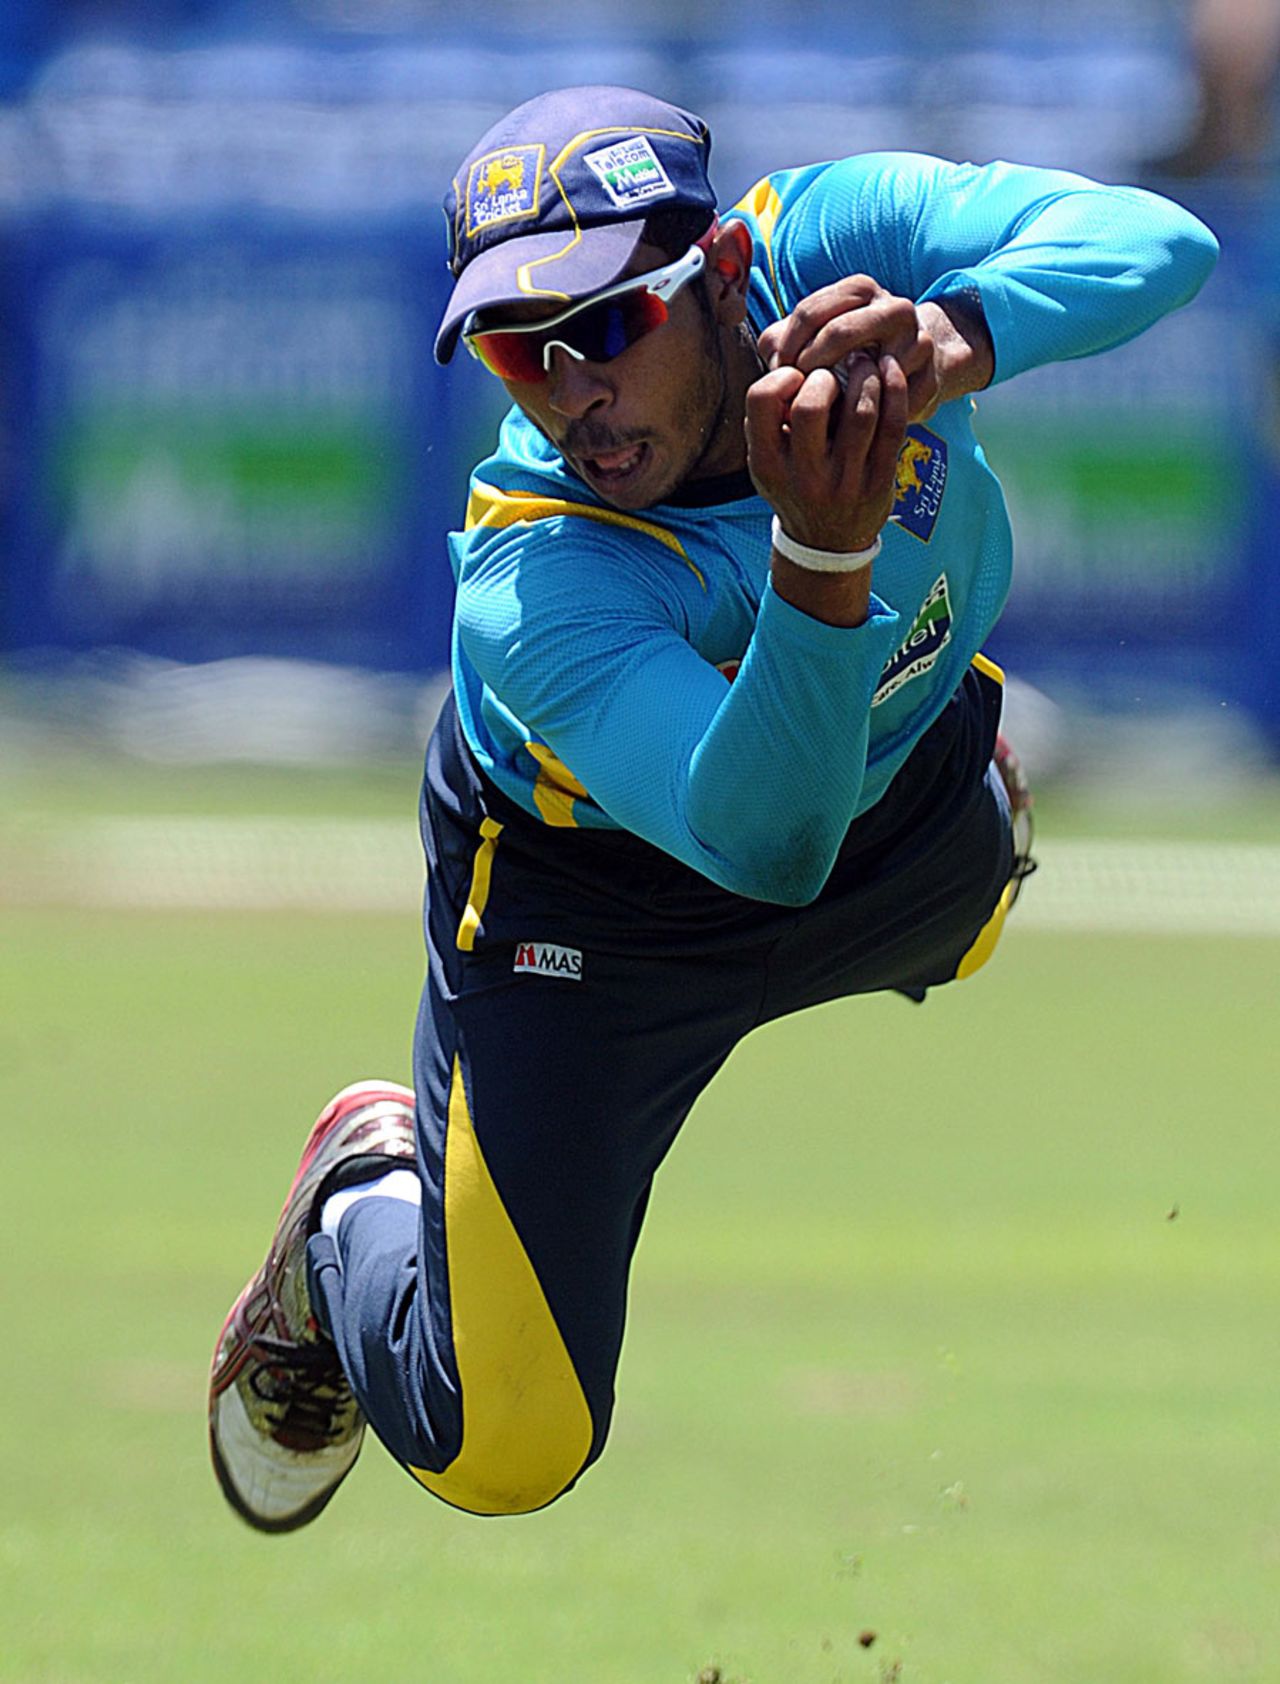 Kithuruwan Vithanage dives to take a catch during a practice session in Pallekele before the T20 match between Sri Lanka and Bangladesh, March 30, 2013